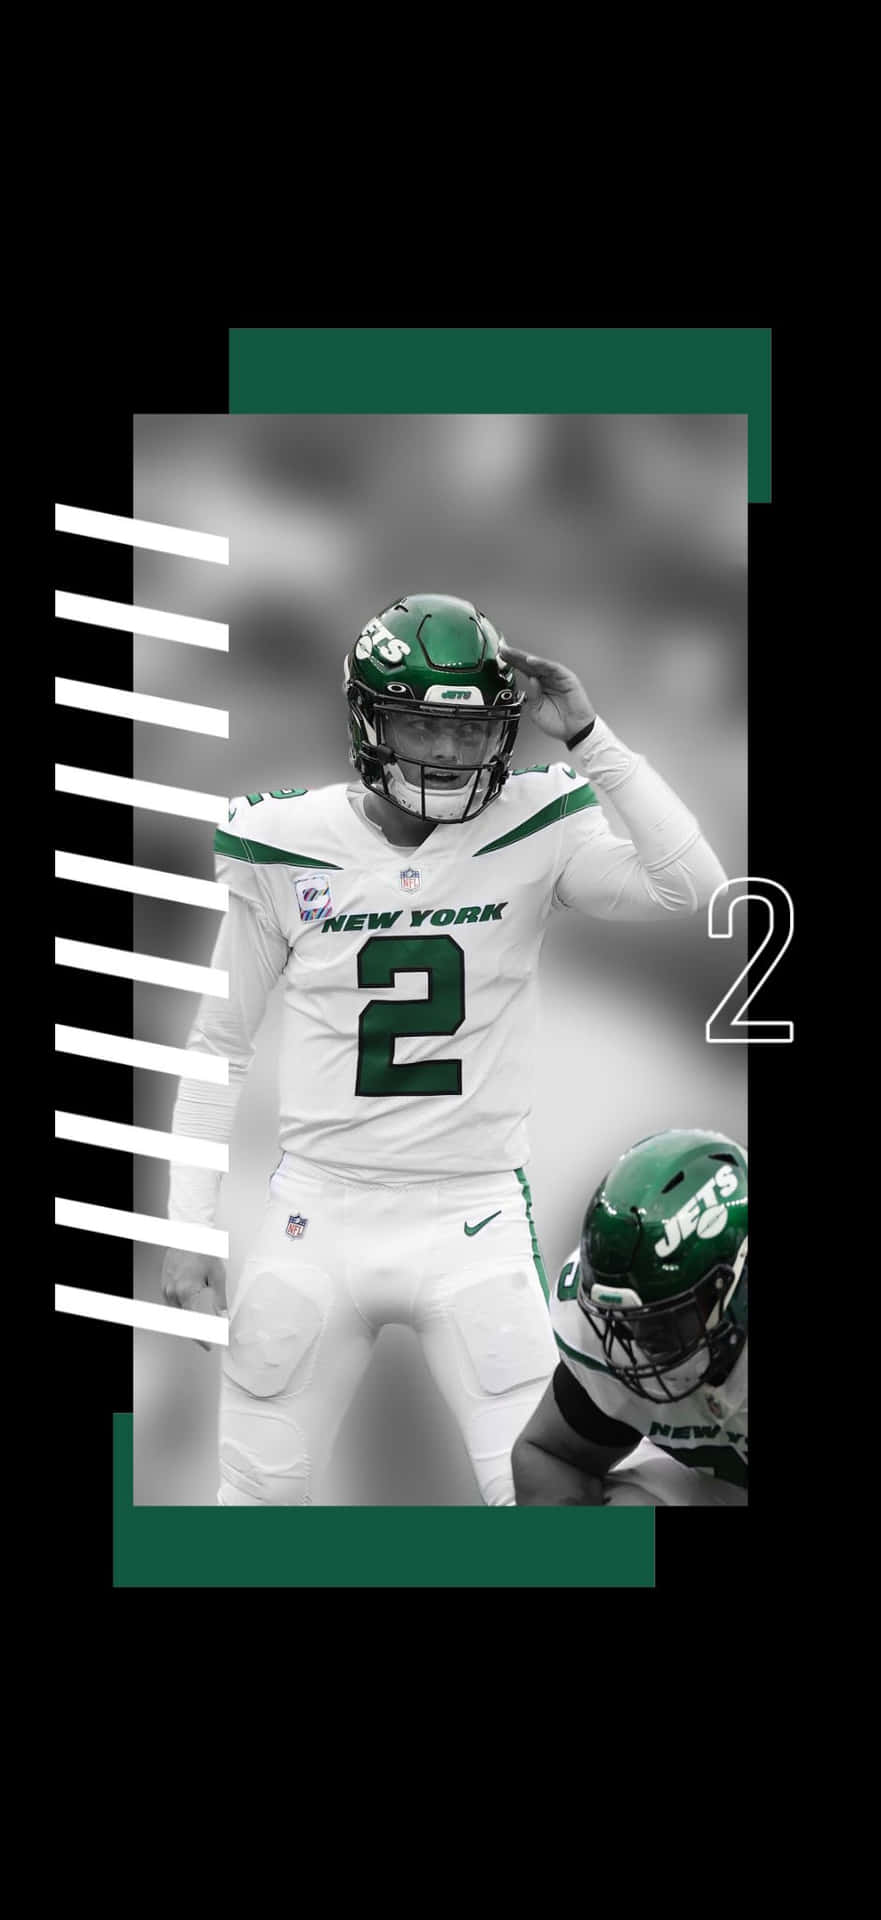 New York Jets Player Number2 Wallpaper